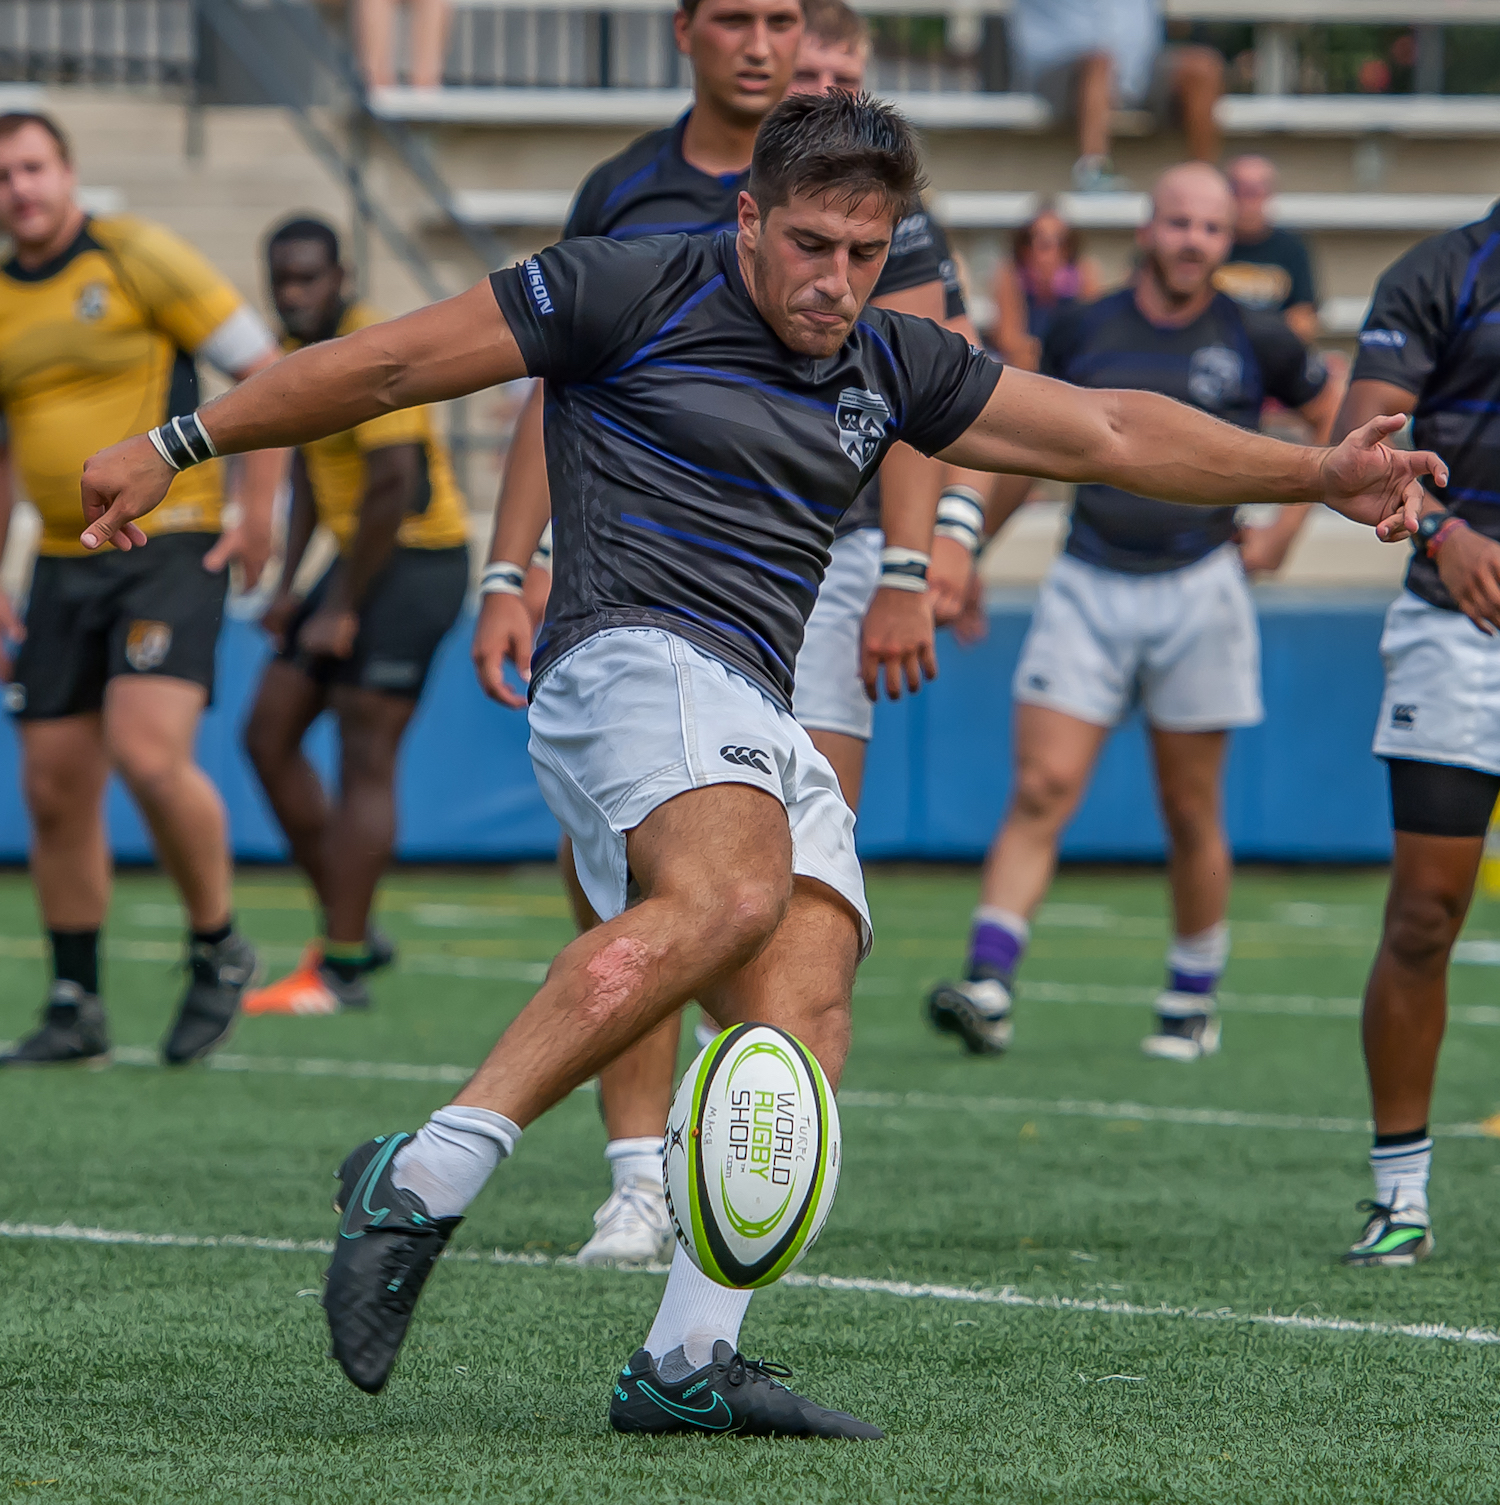 James Madison v Towson University rugby fall 2016. Colleen McCloskey photo for Goff Rugby Report.